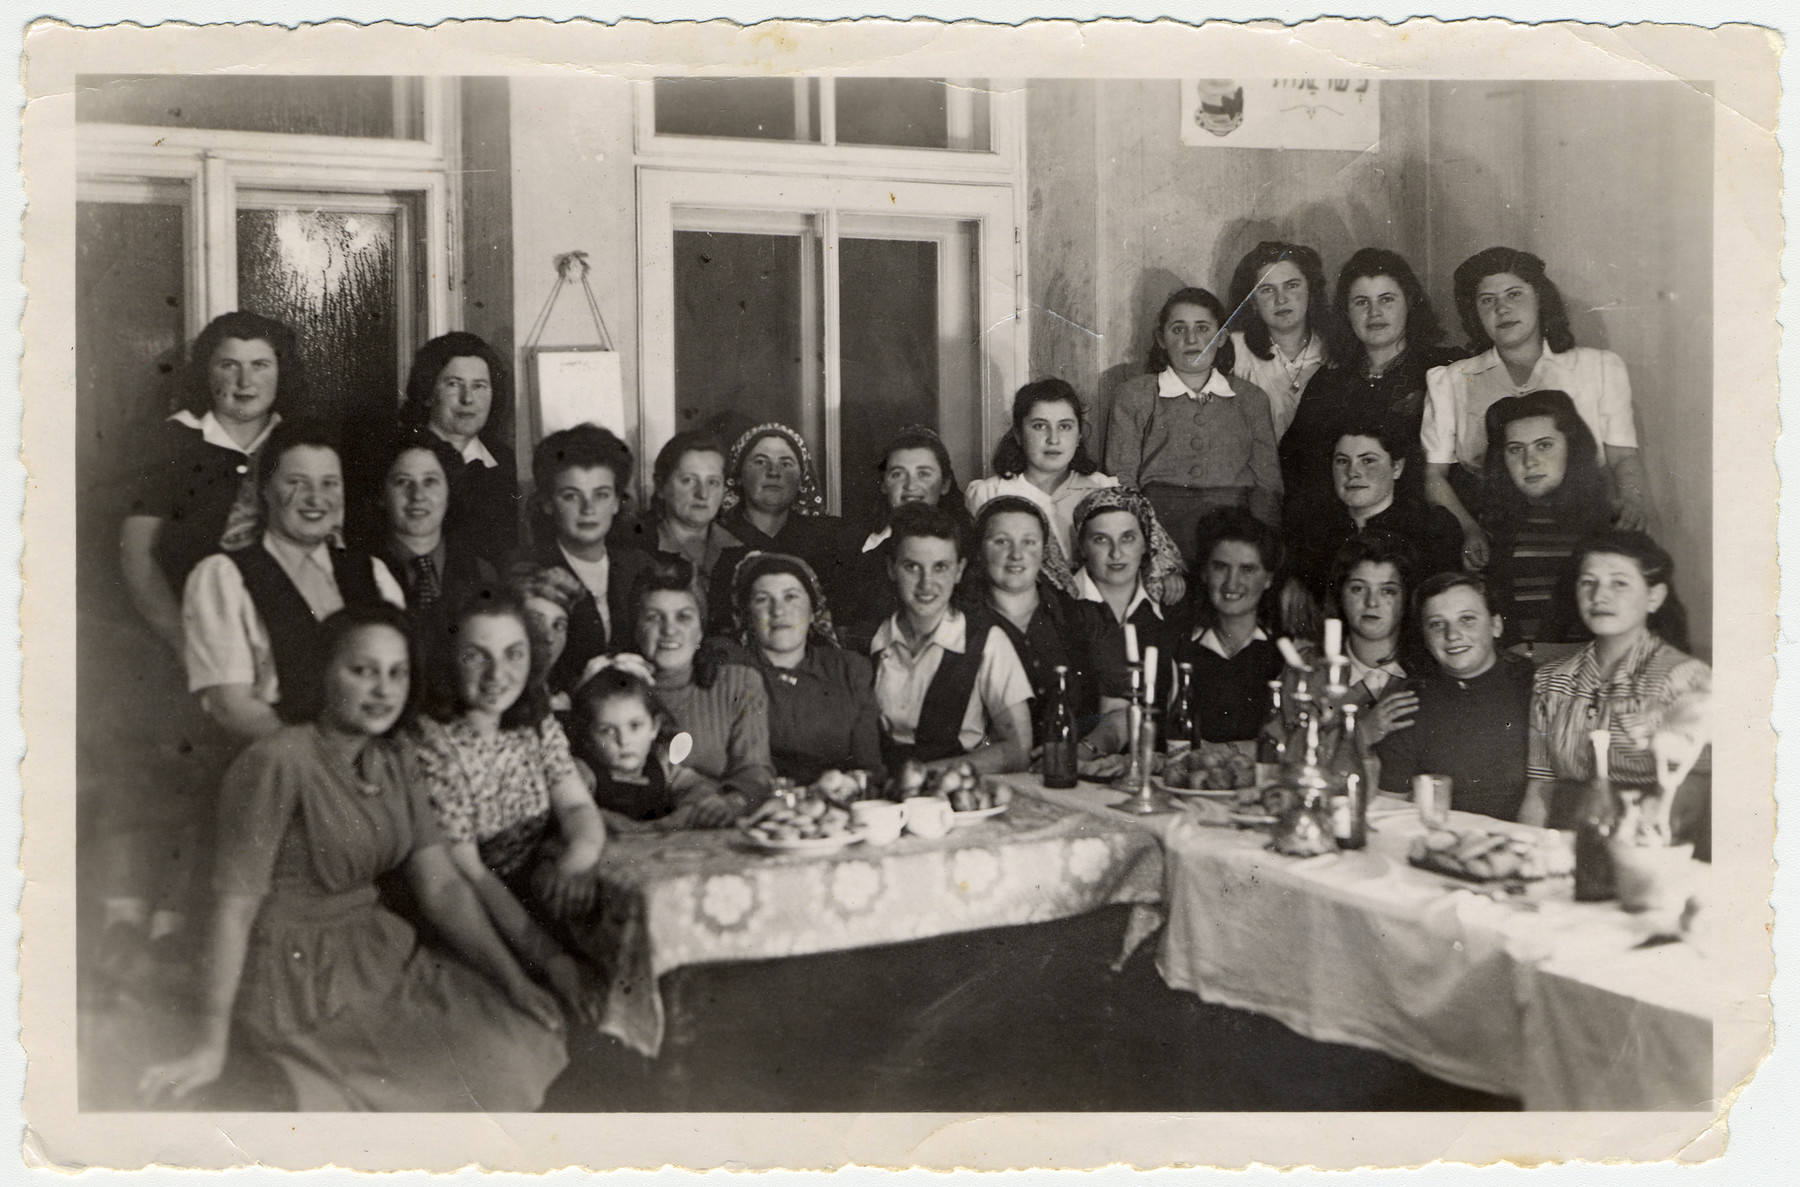 Religious Jewish women gather around a table for a celebration in the Bad Gastein displaced persons' camp.

Among those pictured are Esther and Itka Ass (seated left).